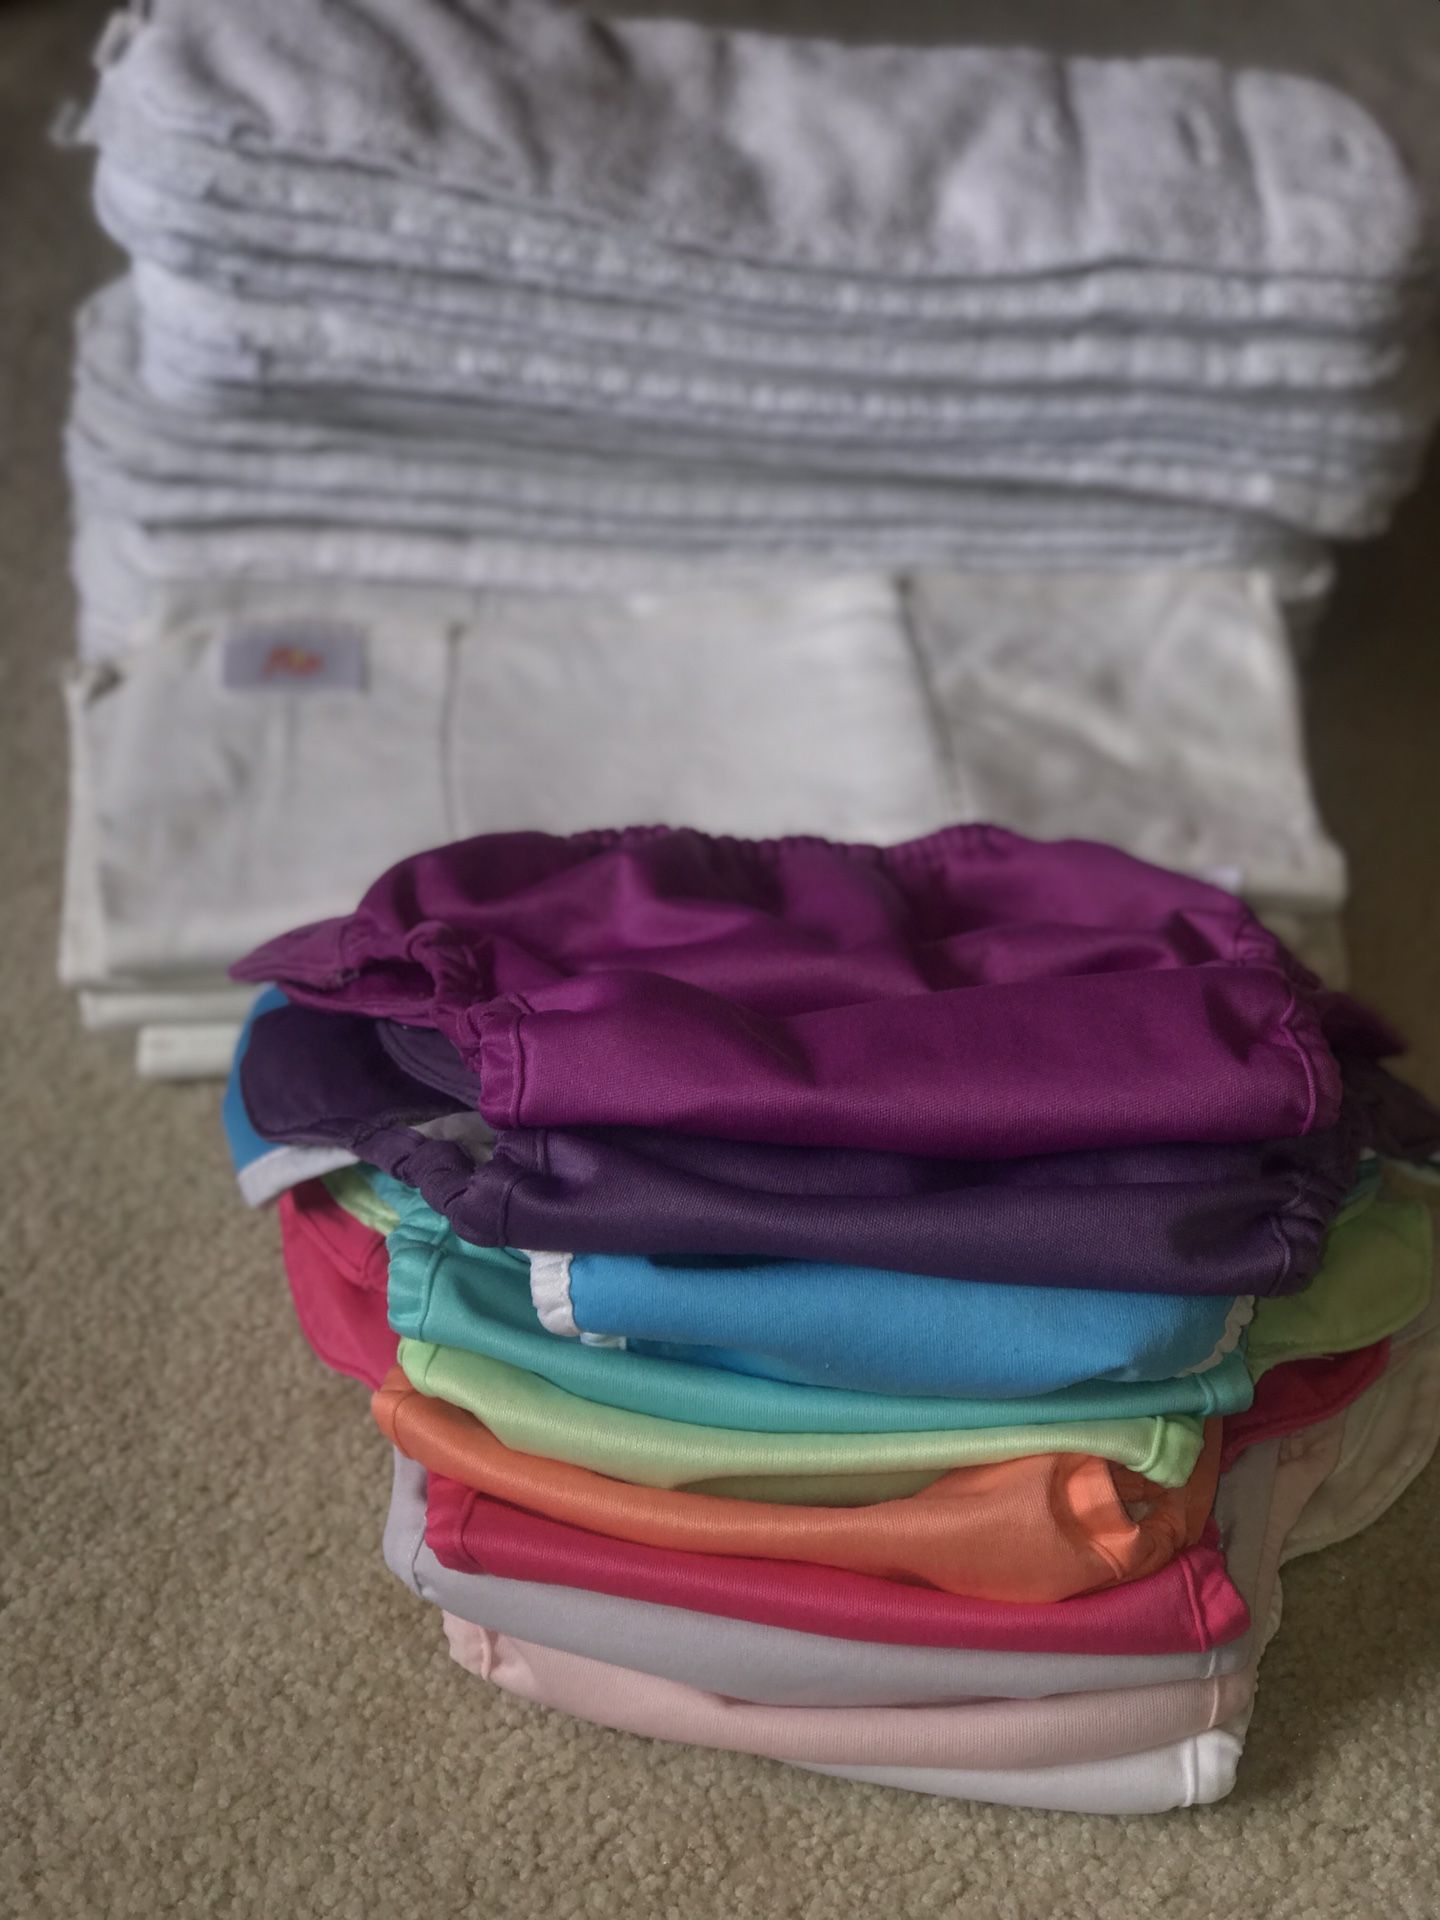 Flip Bumgenius, Thirsties, Cloth diapers lot of 10 covers, 24 liners, organic cotton